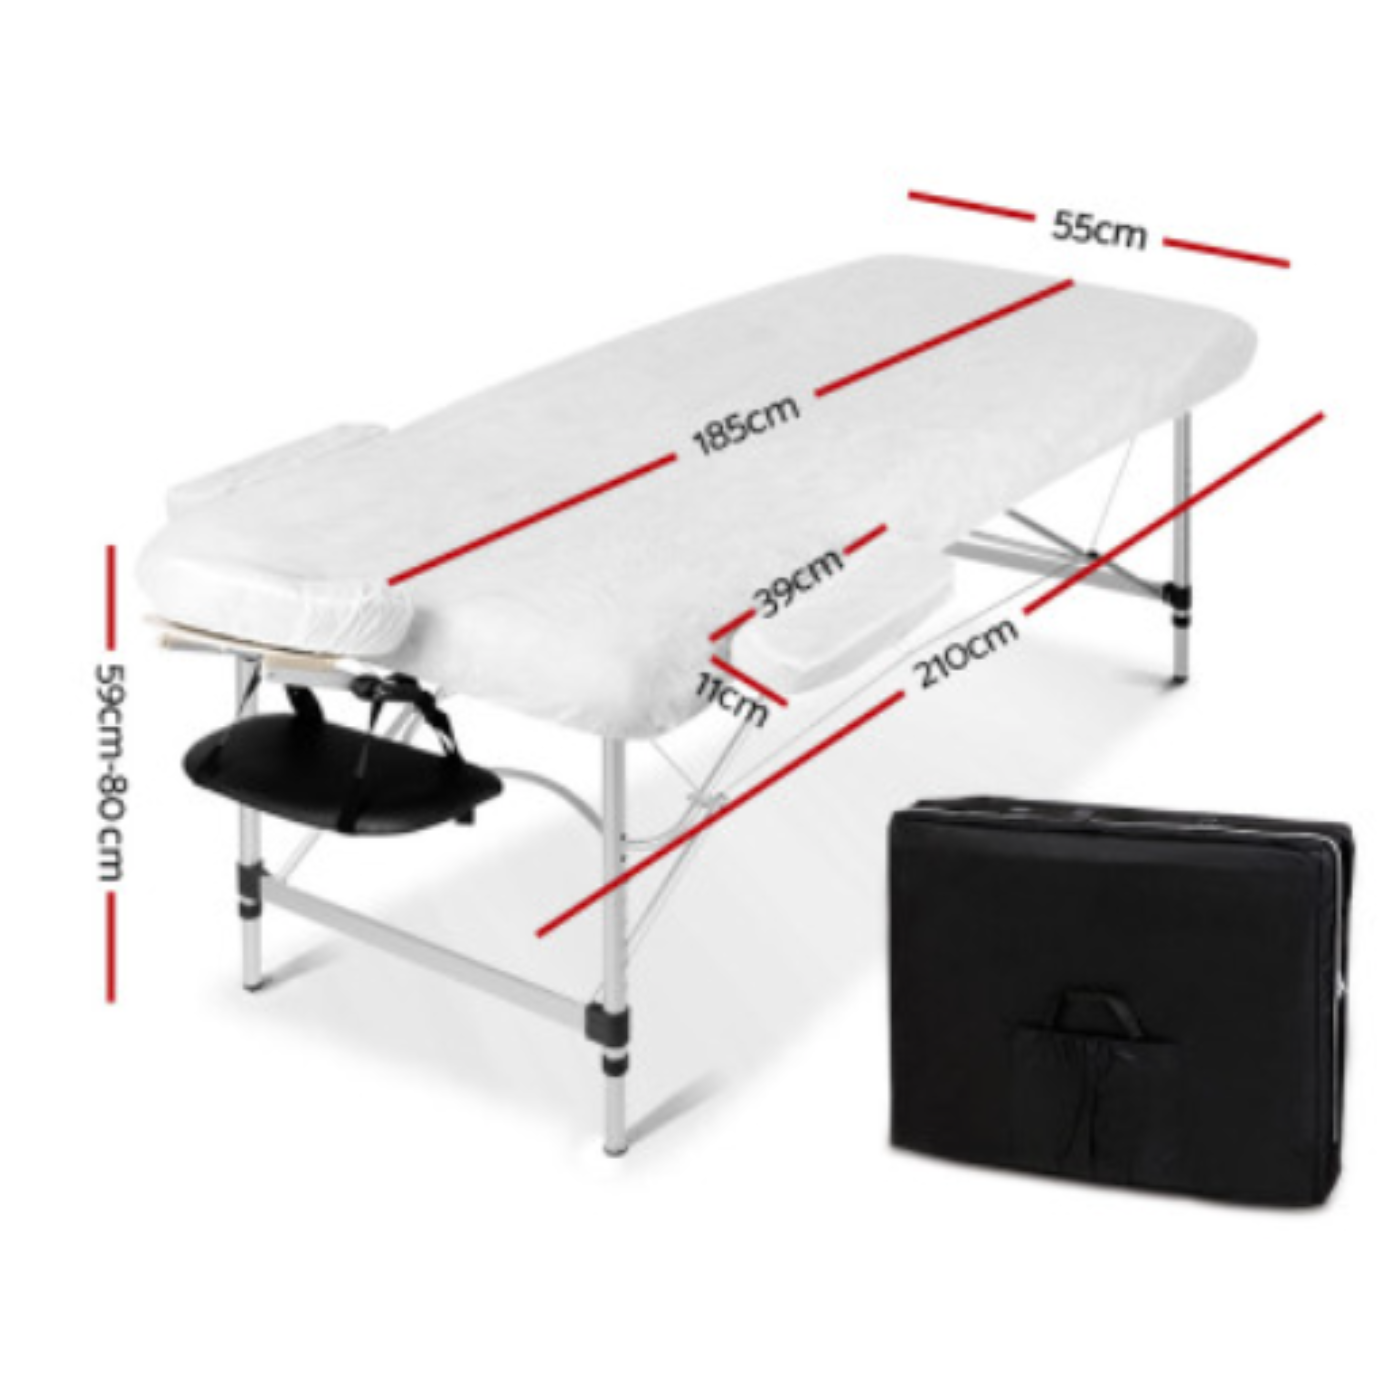 Portable Two-Fold Massage Table - Black or Grey